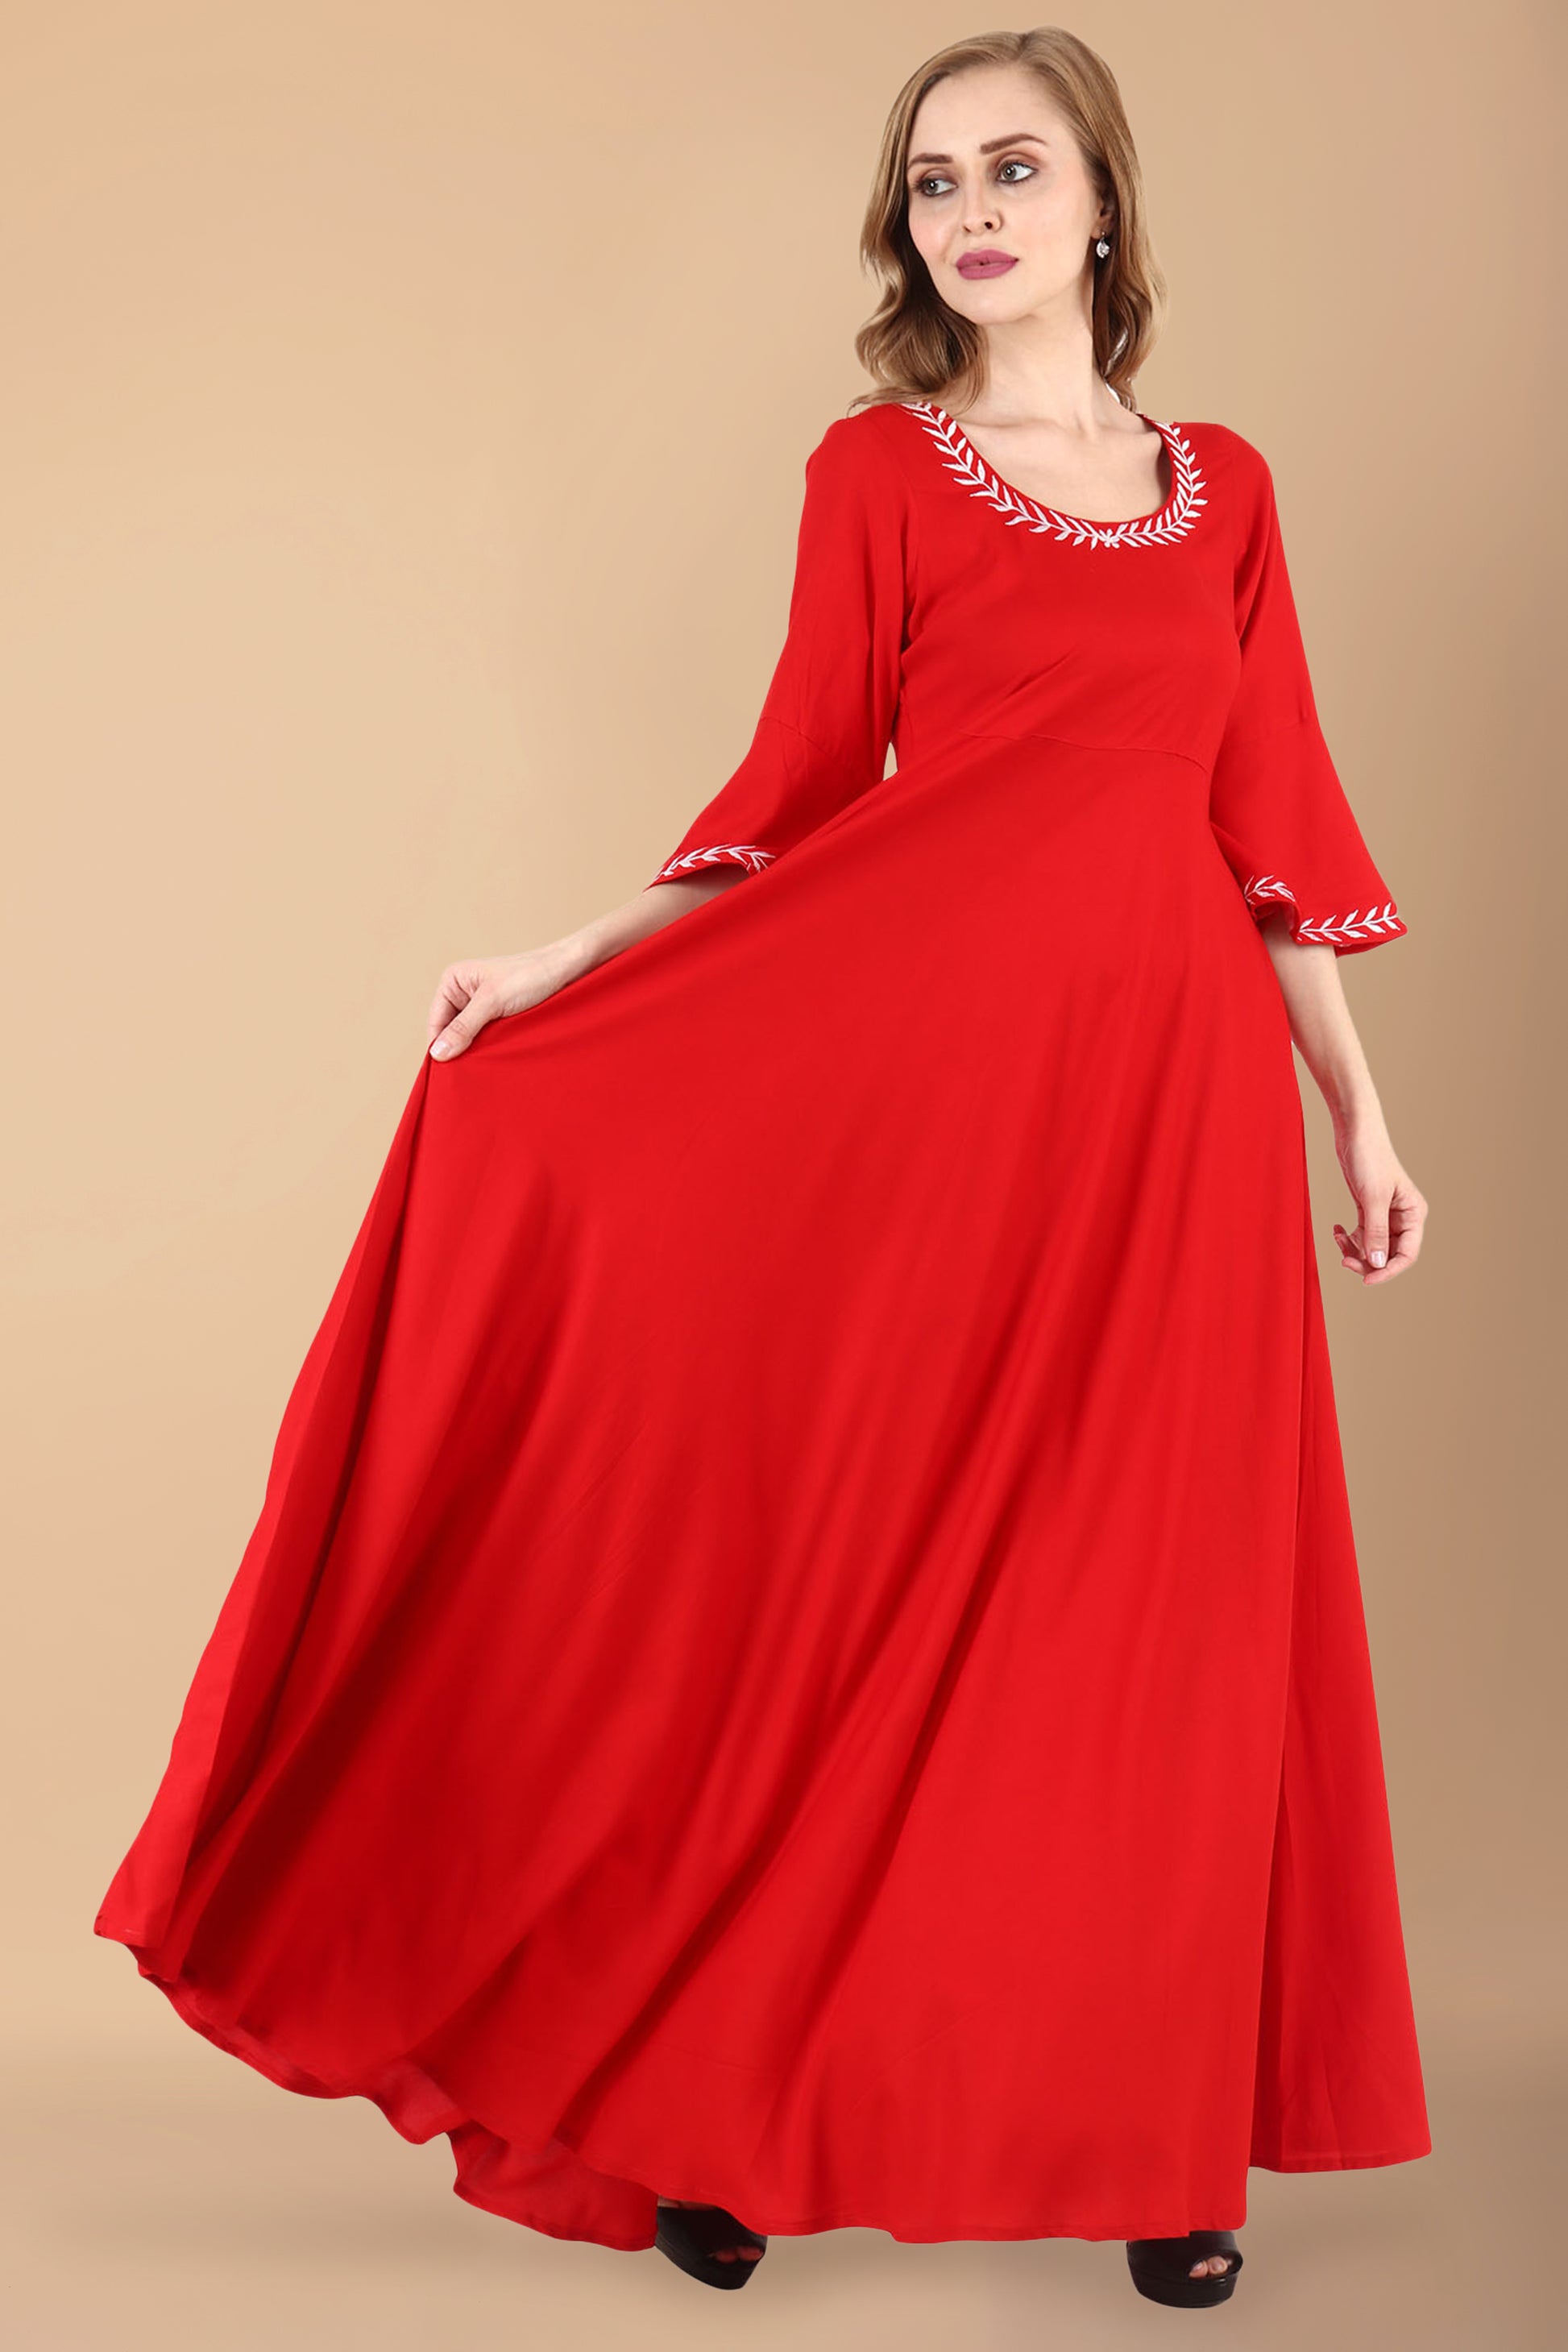 Women Plus Size Red Maternity Gowns | Apella